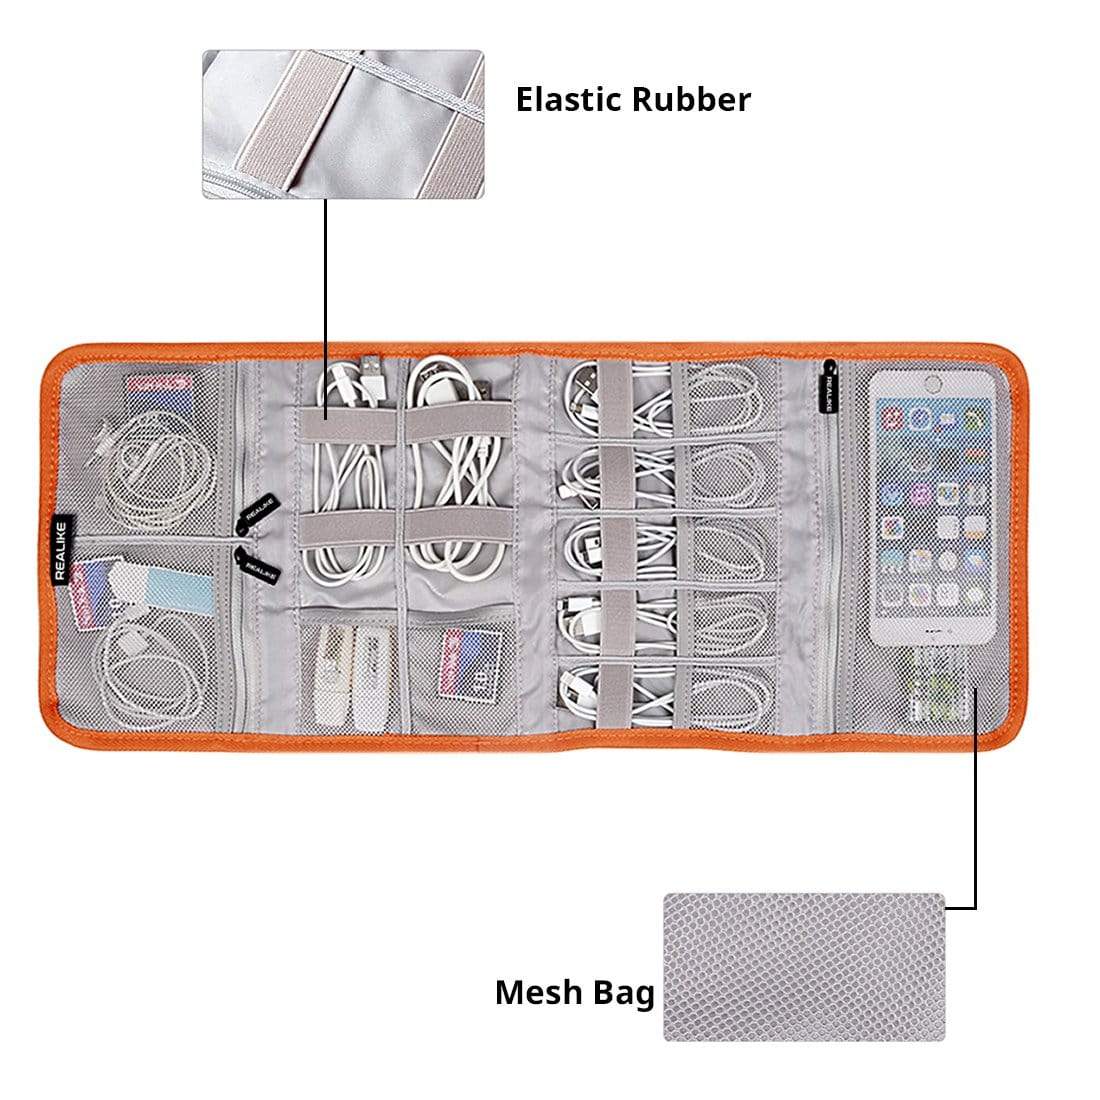 Travel Electronics Organizer, 4 Folders Electronic Accessories Organizer for Cord, Hard Drive, Earphone, Power Bank and Others